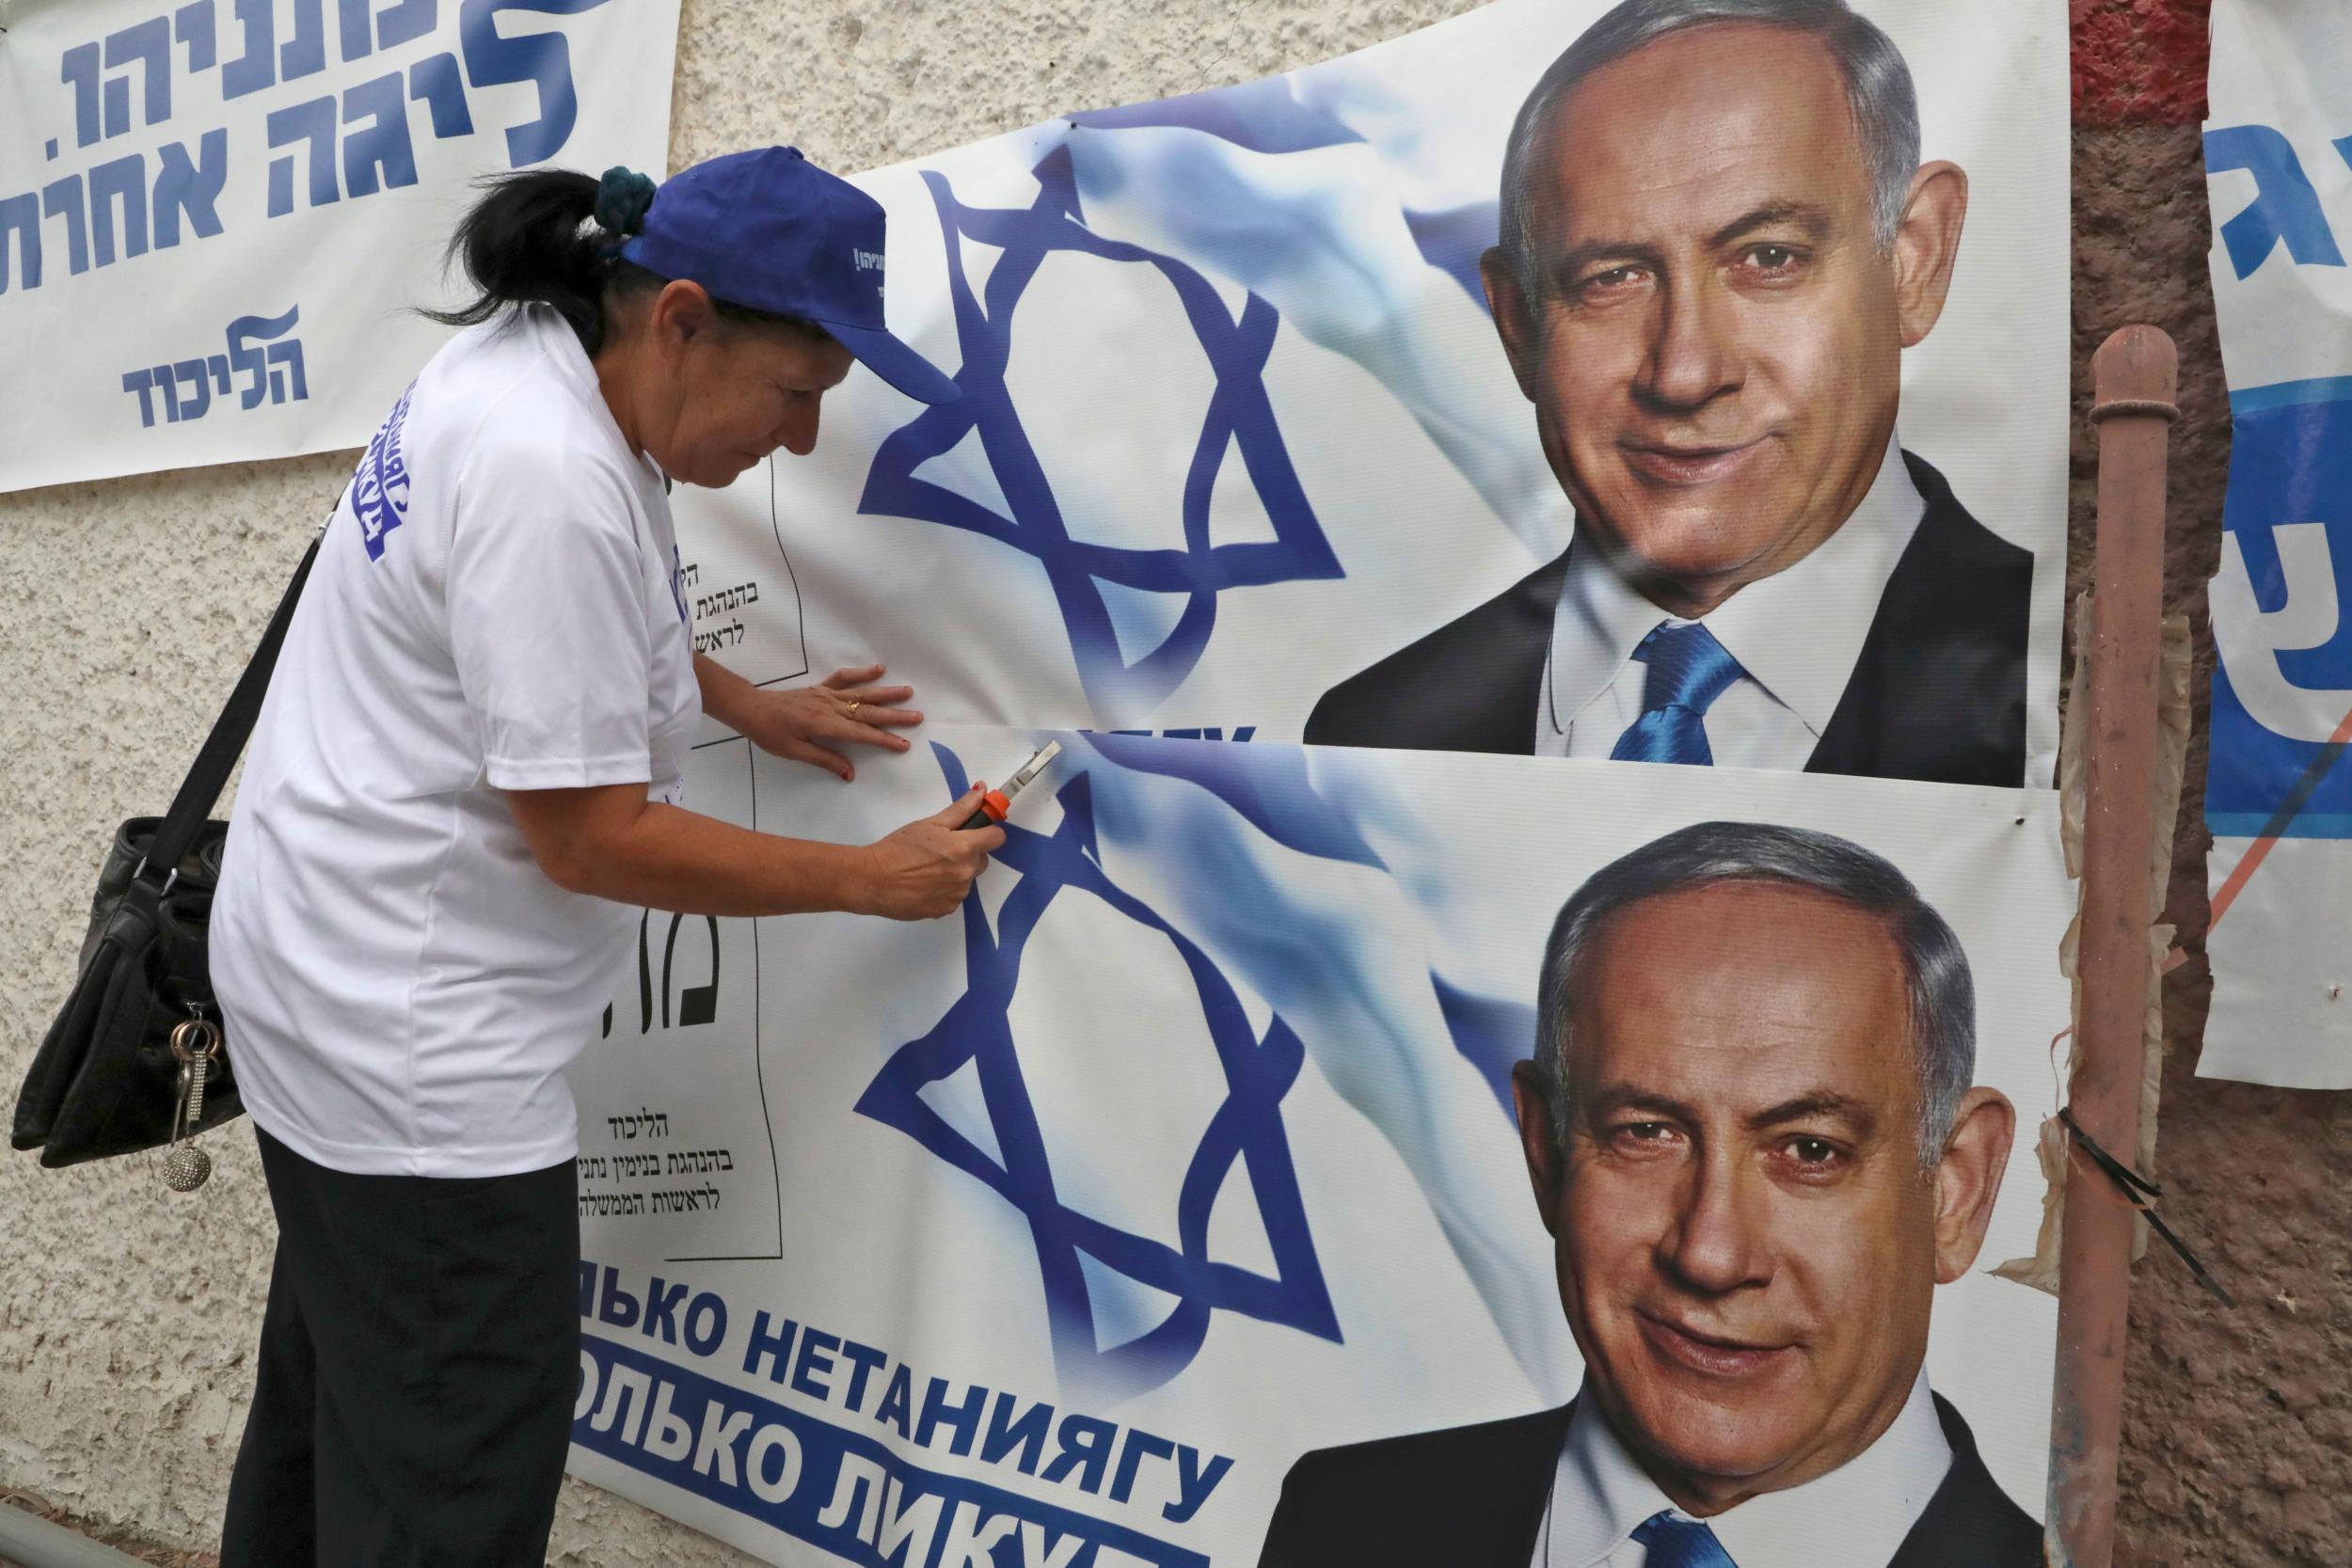 A woman places electoral banners for the Likud party showing chairman and Israeli Prime Minister Benjamin Netanyahu in the southern Israeli city of Beersheva on September 15, 2019